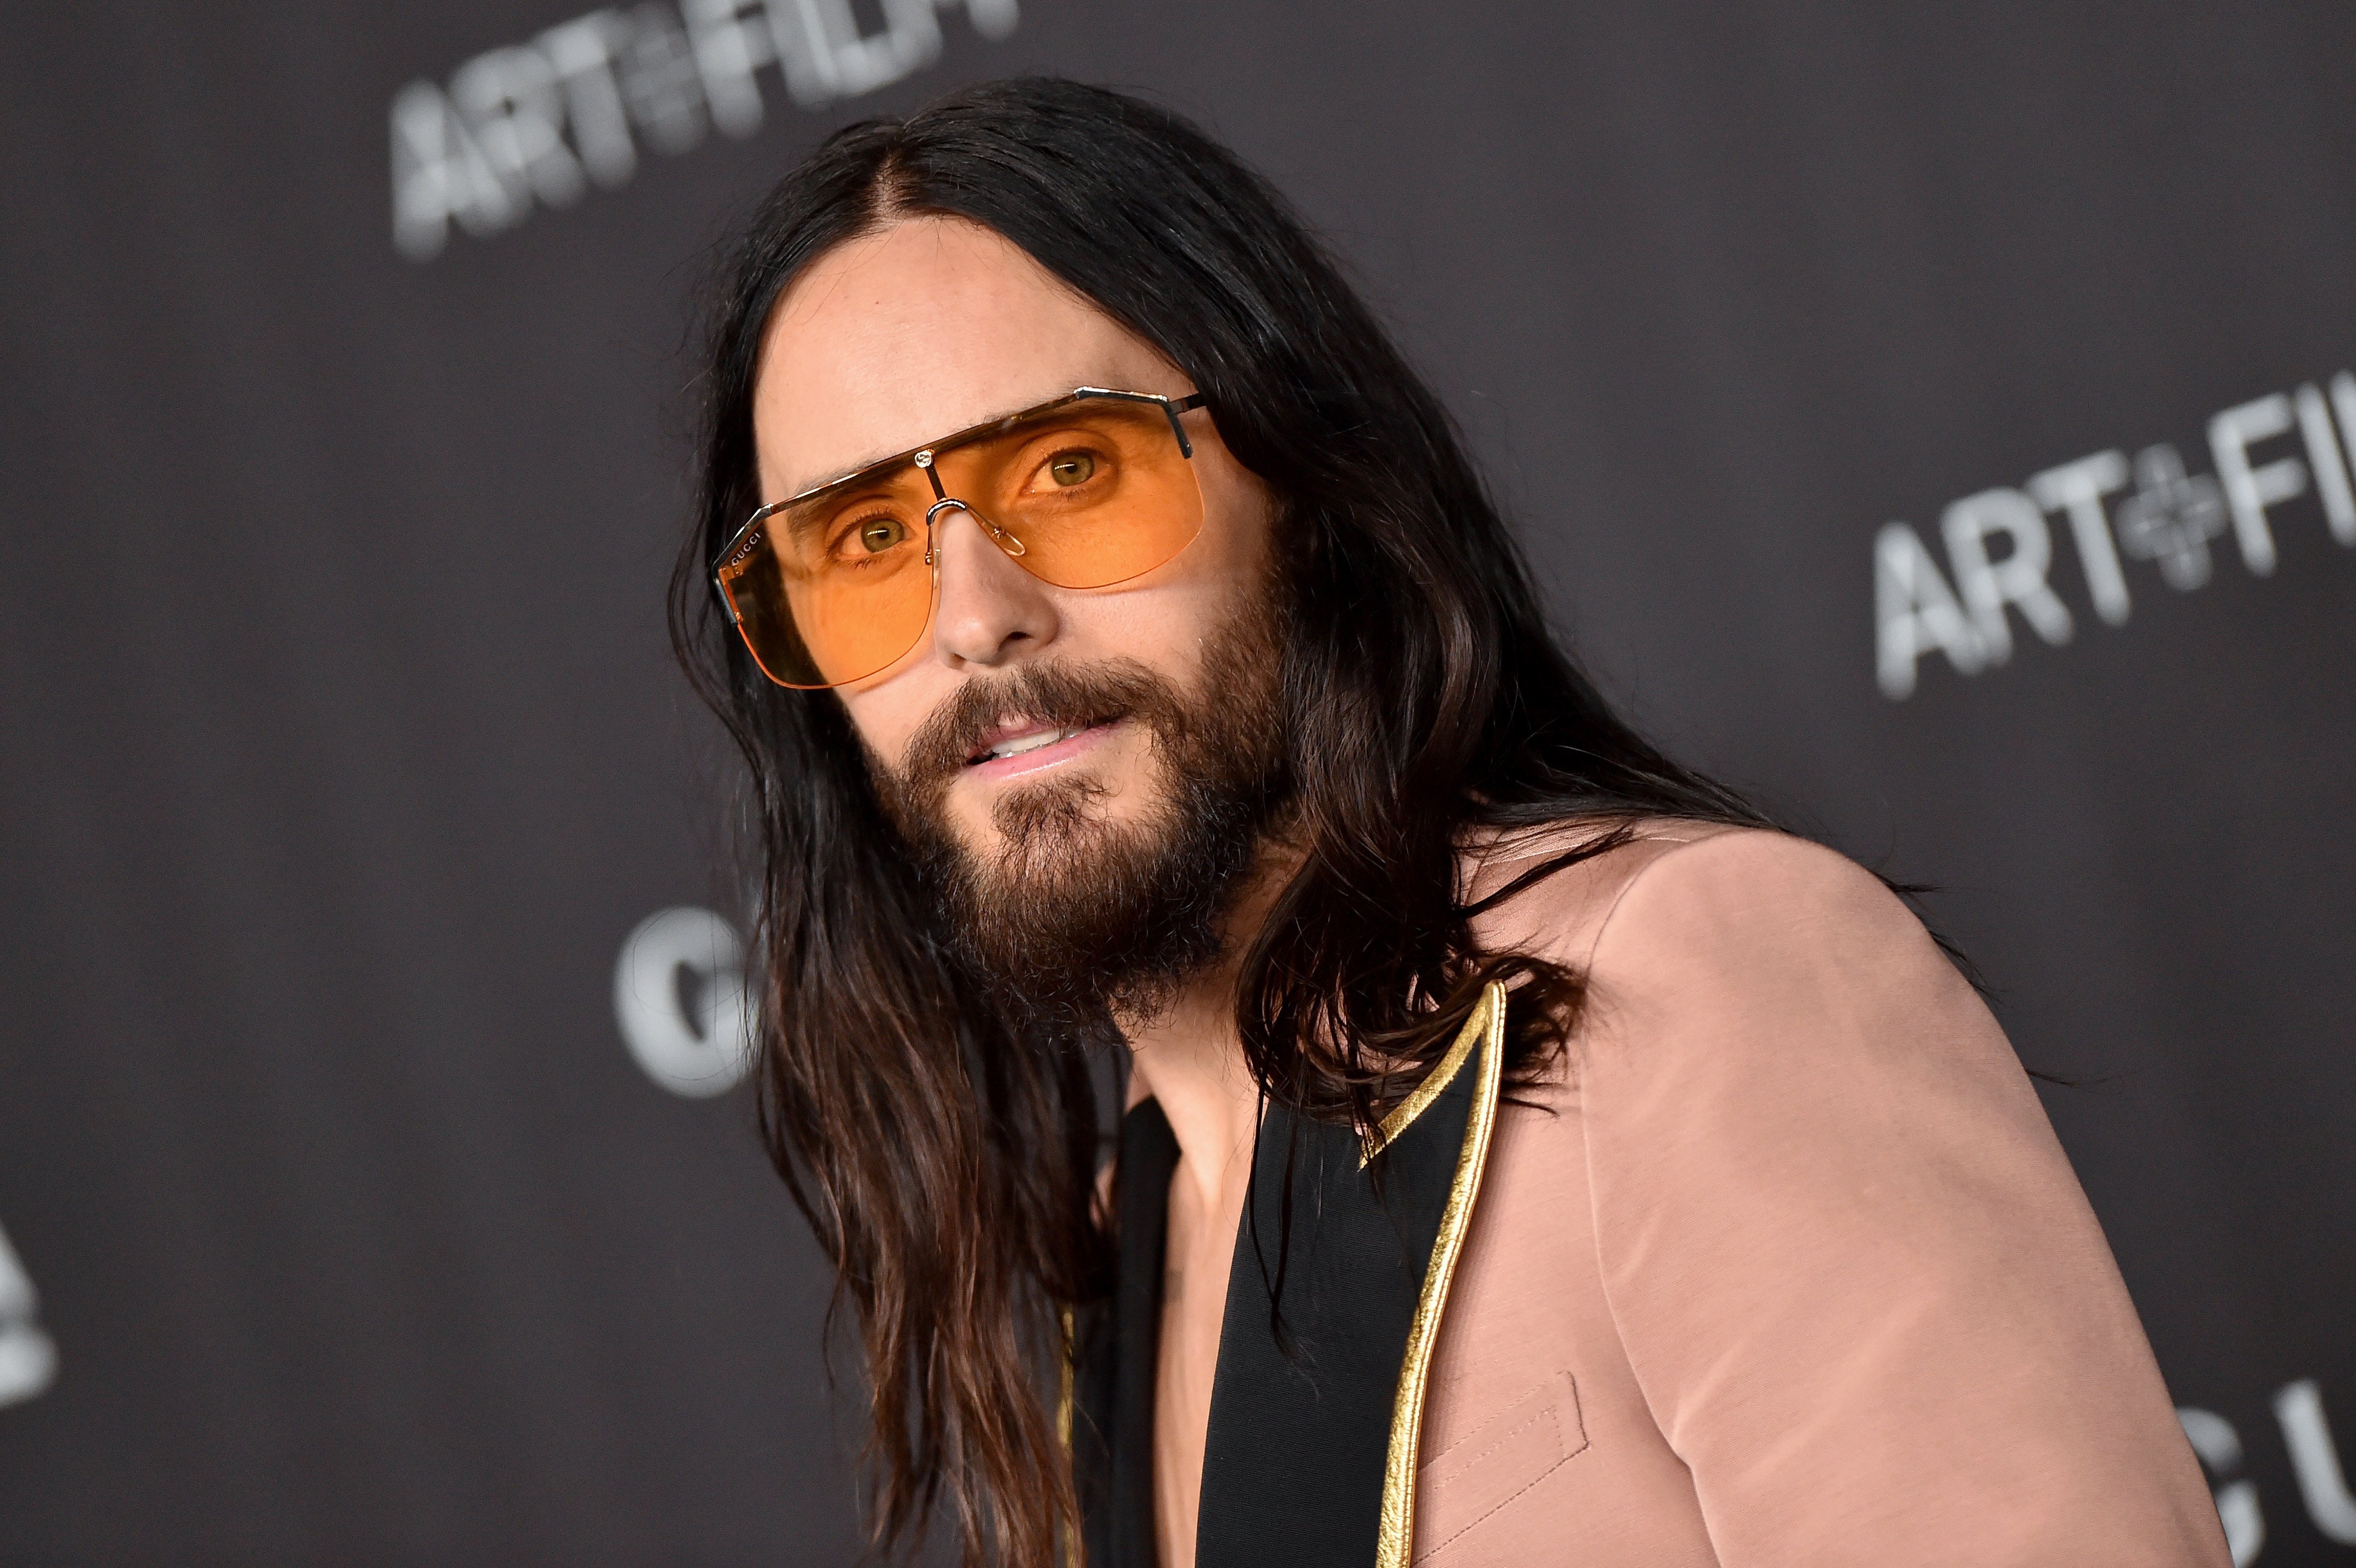 Jared Leto attends the 2019 LACMA Art + Film Gala Presented By Gucci on November 02, 2019 in Los Angeles, California | Photo: Getty Images